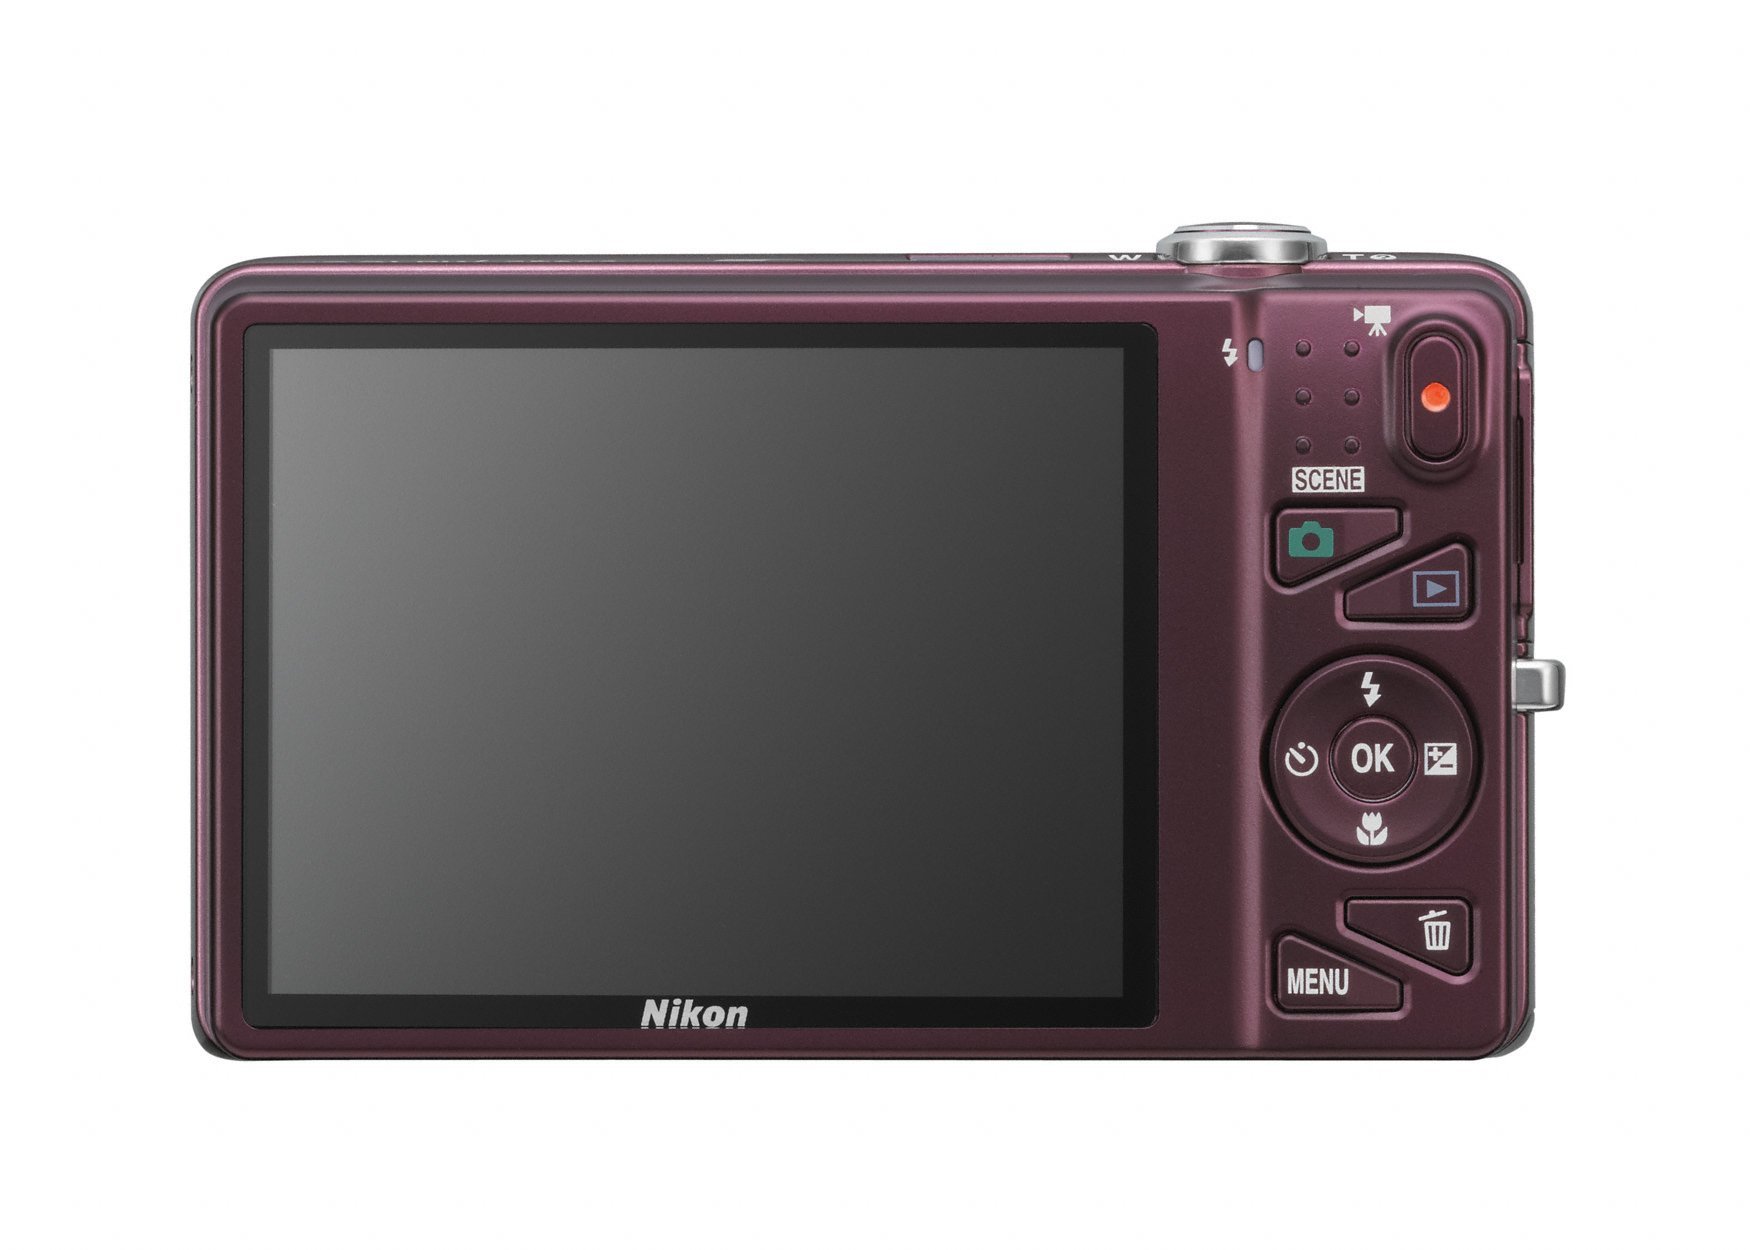 Nikon COOLPIX S5200 Wi-Fi CMOS Digital Camera with 6x Zoom Lens (Plum) (OLD MODEL)